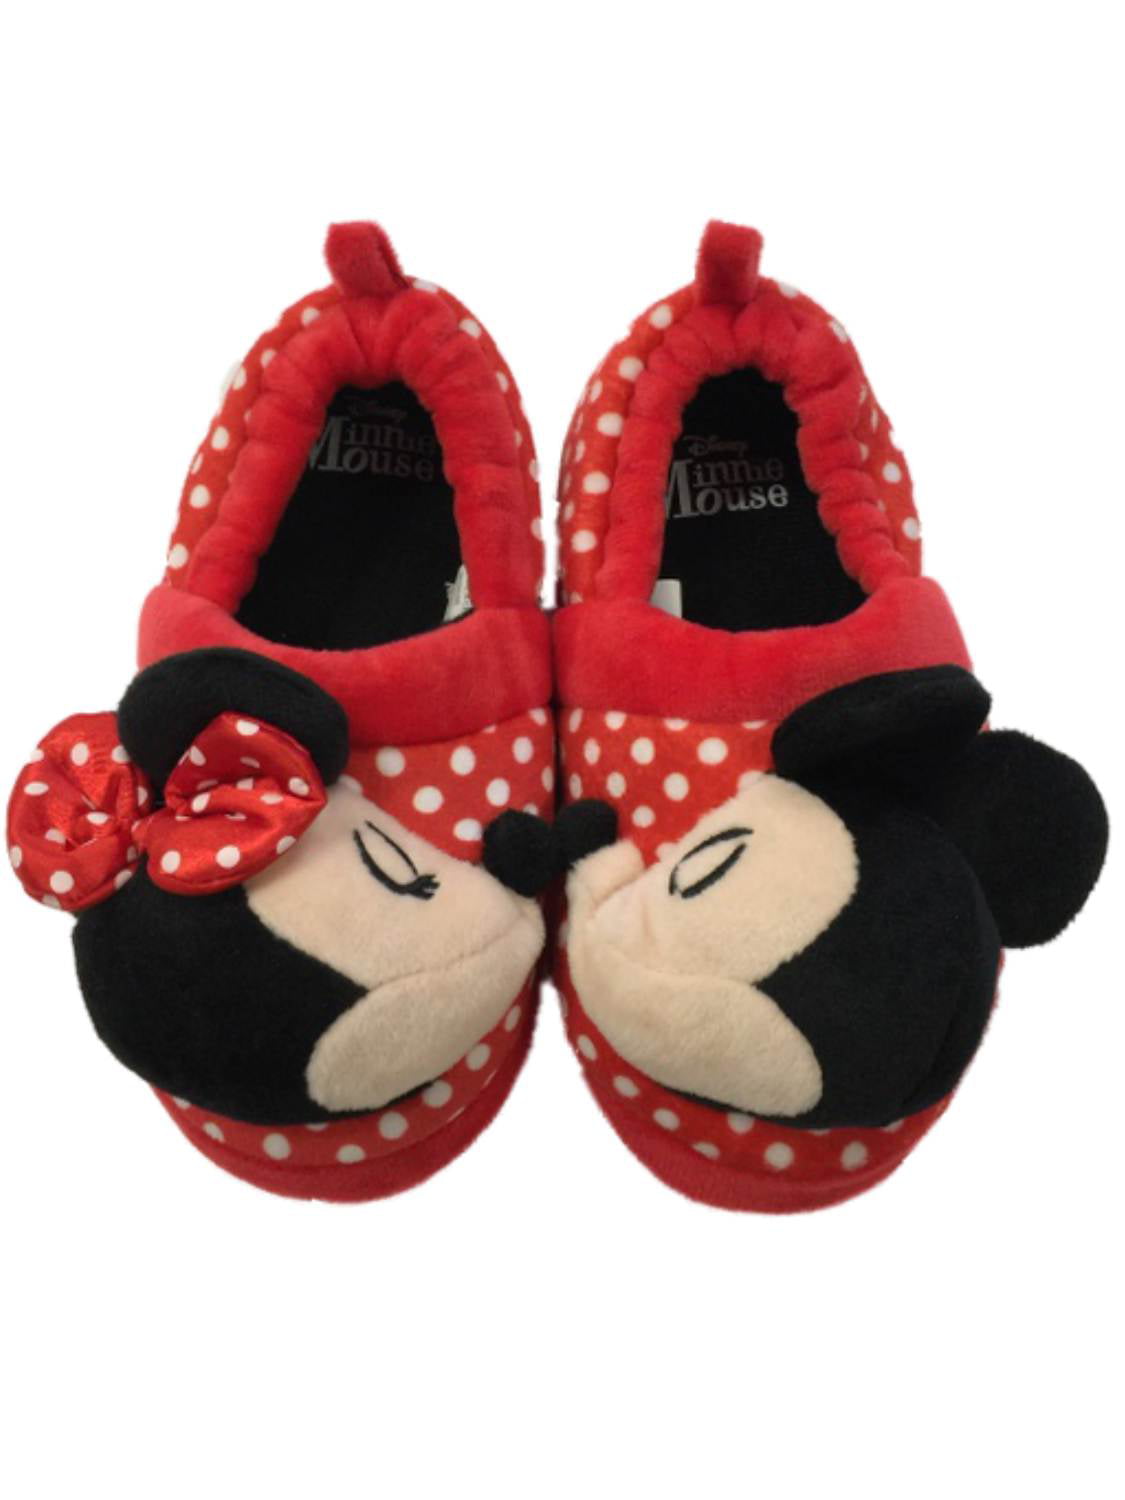 walmart mickey mouse slippers